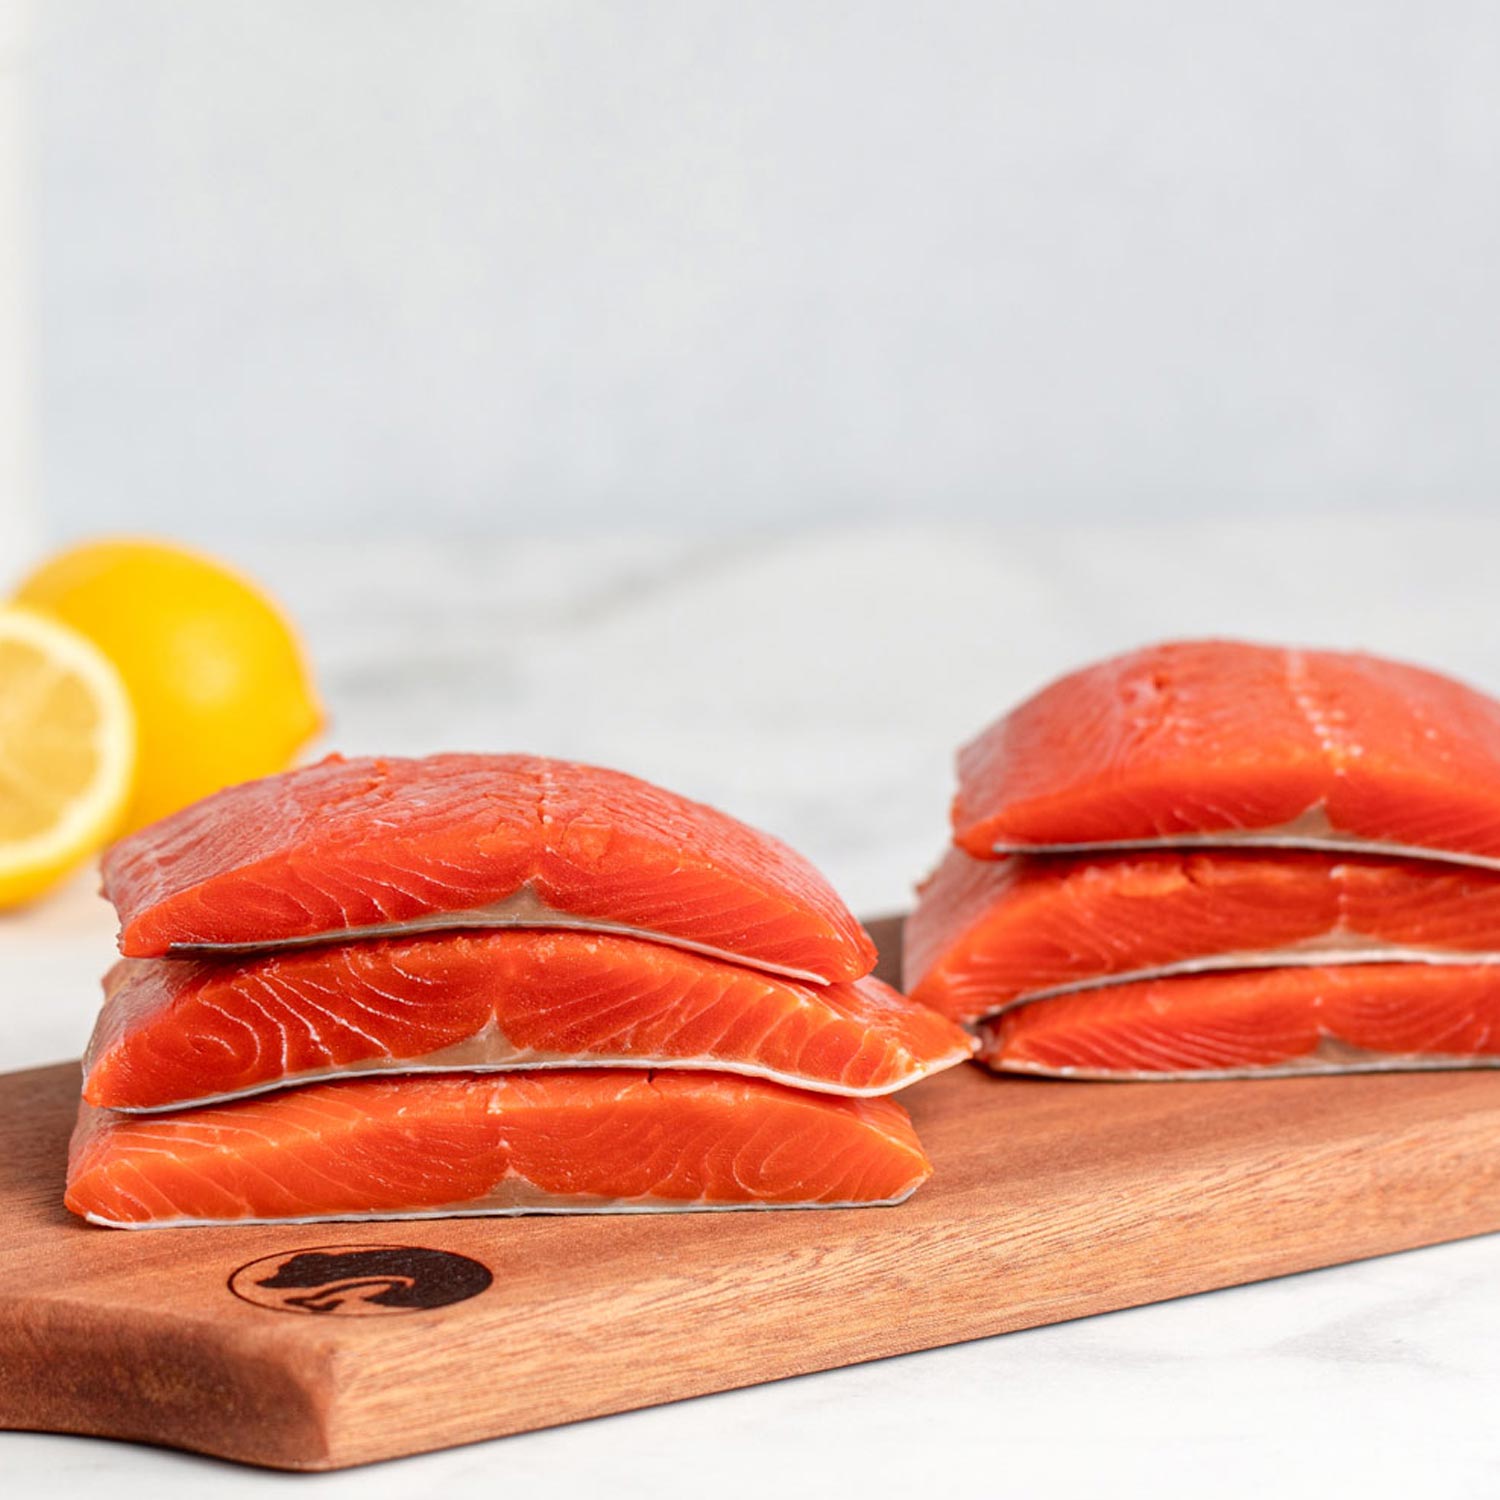 Pacific Seafood Fresh Wild Caught Sockeye Salmon Fillet (Previously  Frozen), 10 oz - Pay Less Super Markets